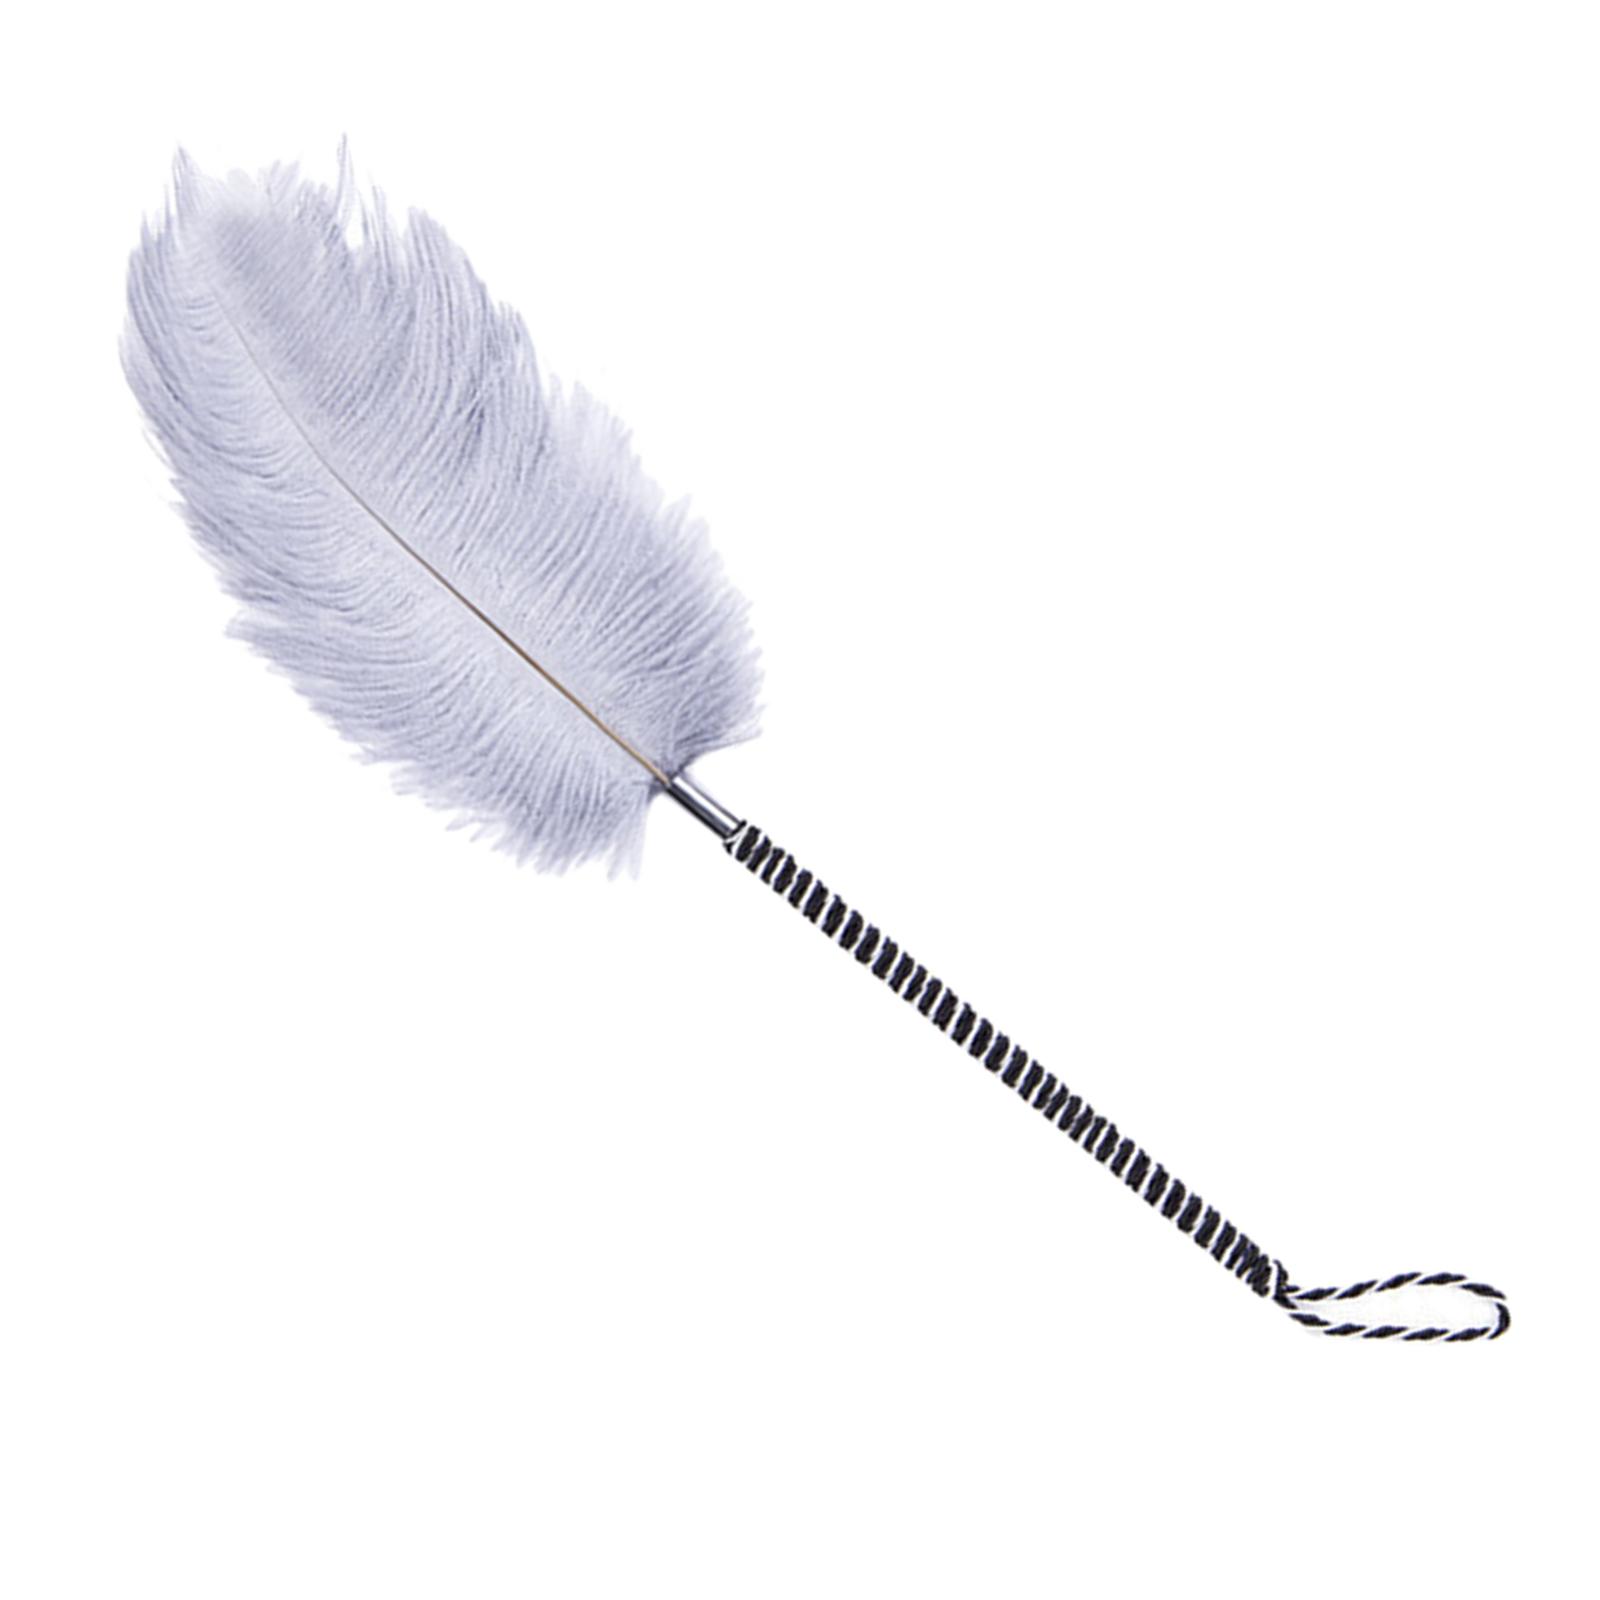 1Pcs Feather Whip Sex Toys W/ Handle Tickler Tied Rope for Bdsm Gay Couples